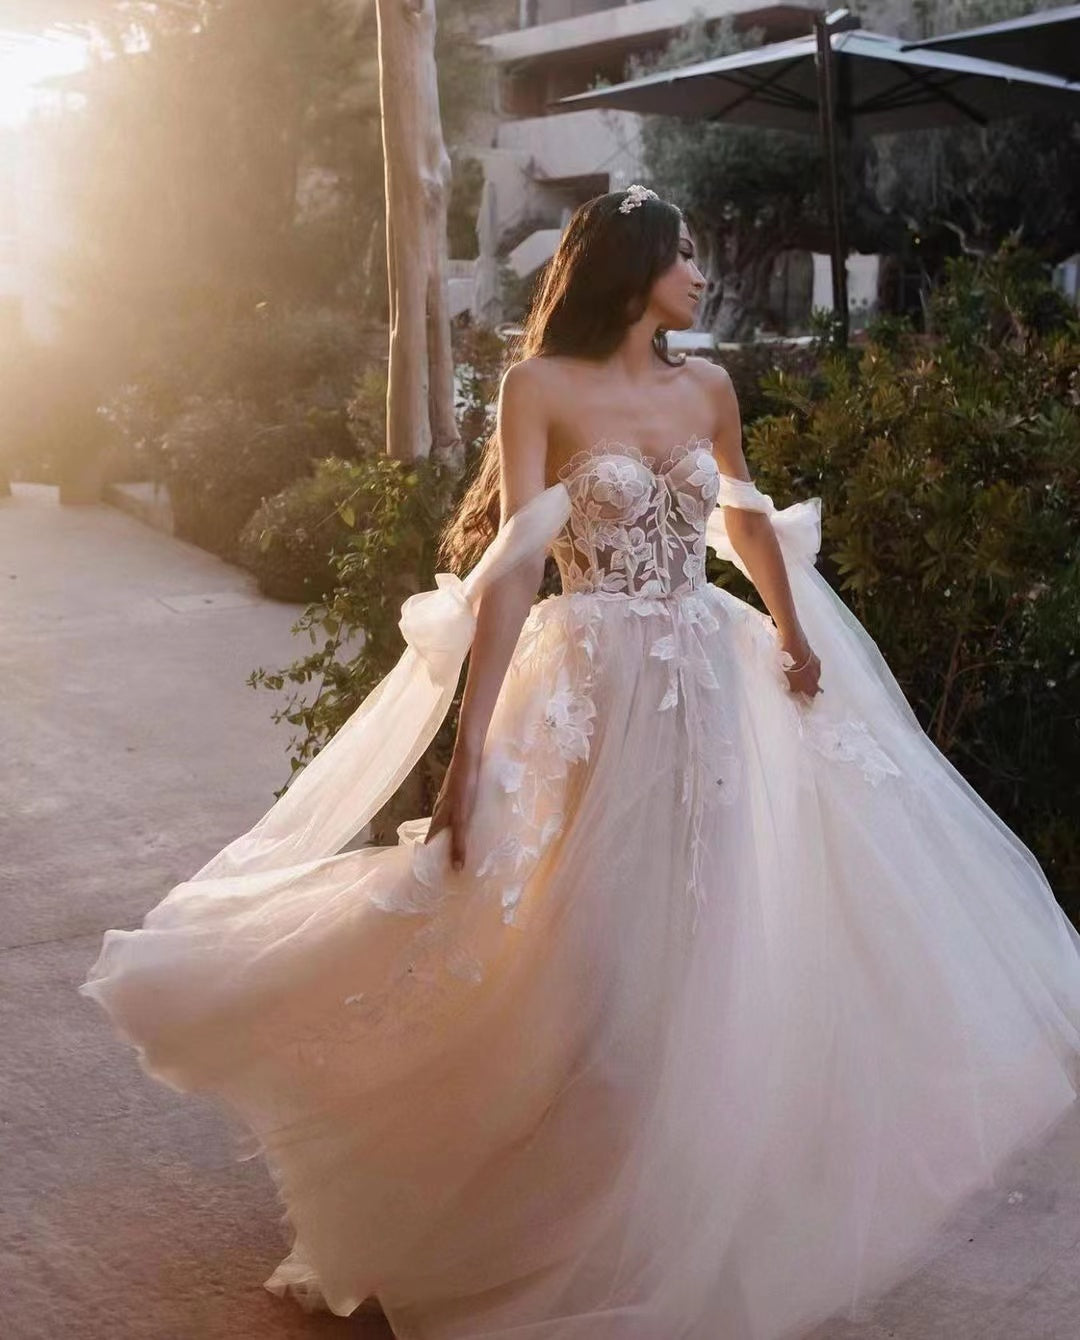 A-line Tulle Lace Popular Wedding Dresses, Newest Off The Shoulder Bridal Gowns, Sweetheart Wedding Dresses